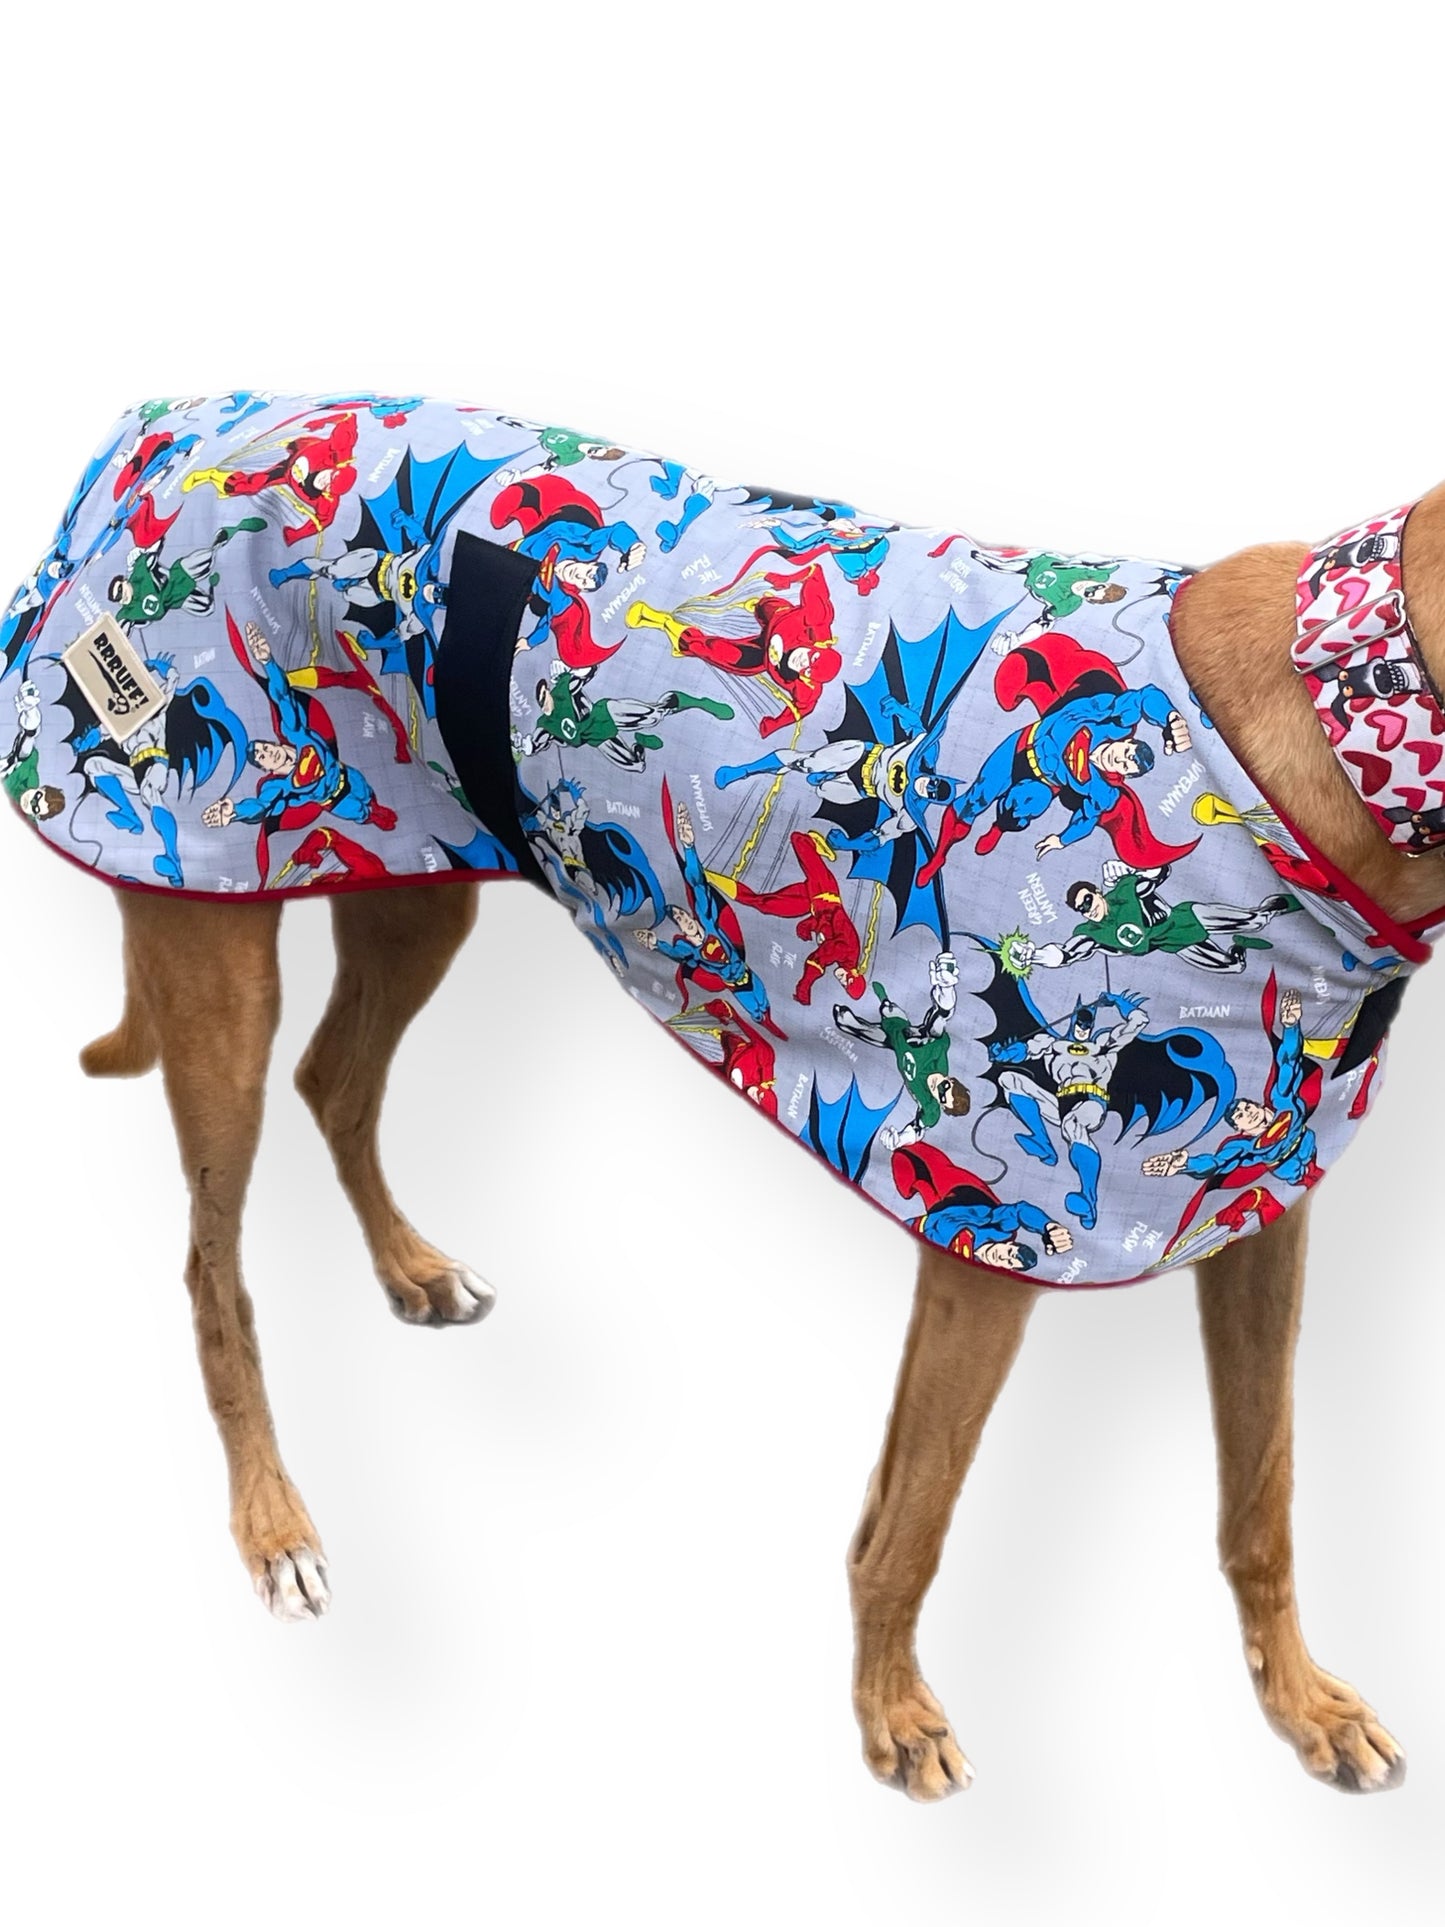 Autumn classic style Greyhound coat superheroes design in a sturdy cotton & lush fleece washable